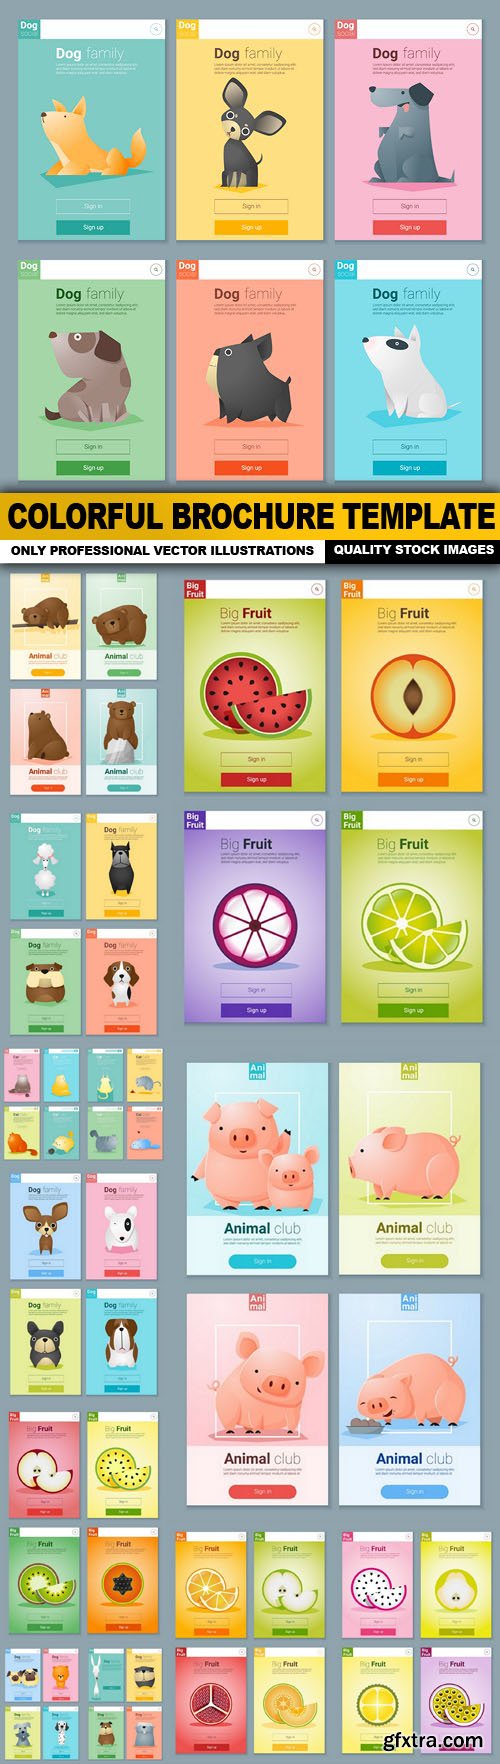 Colorful Brochure Template - 17 Vector